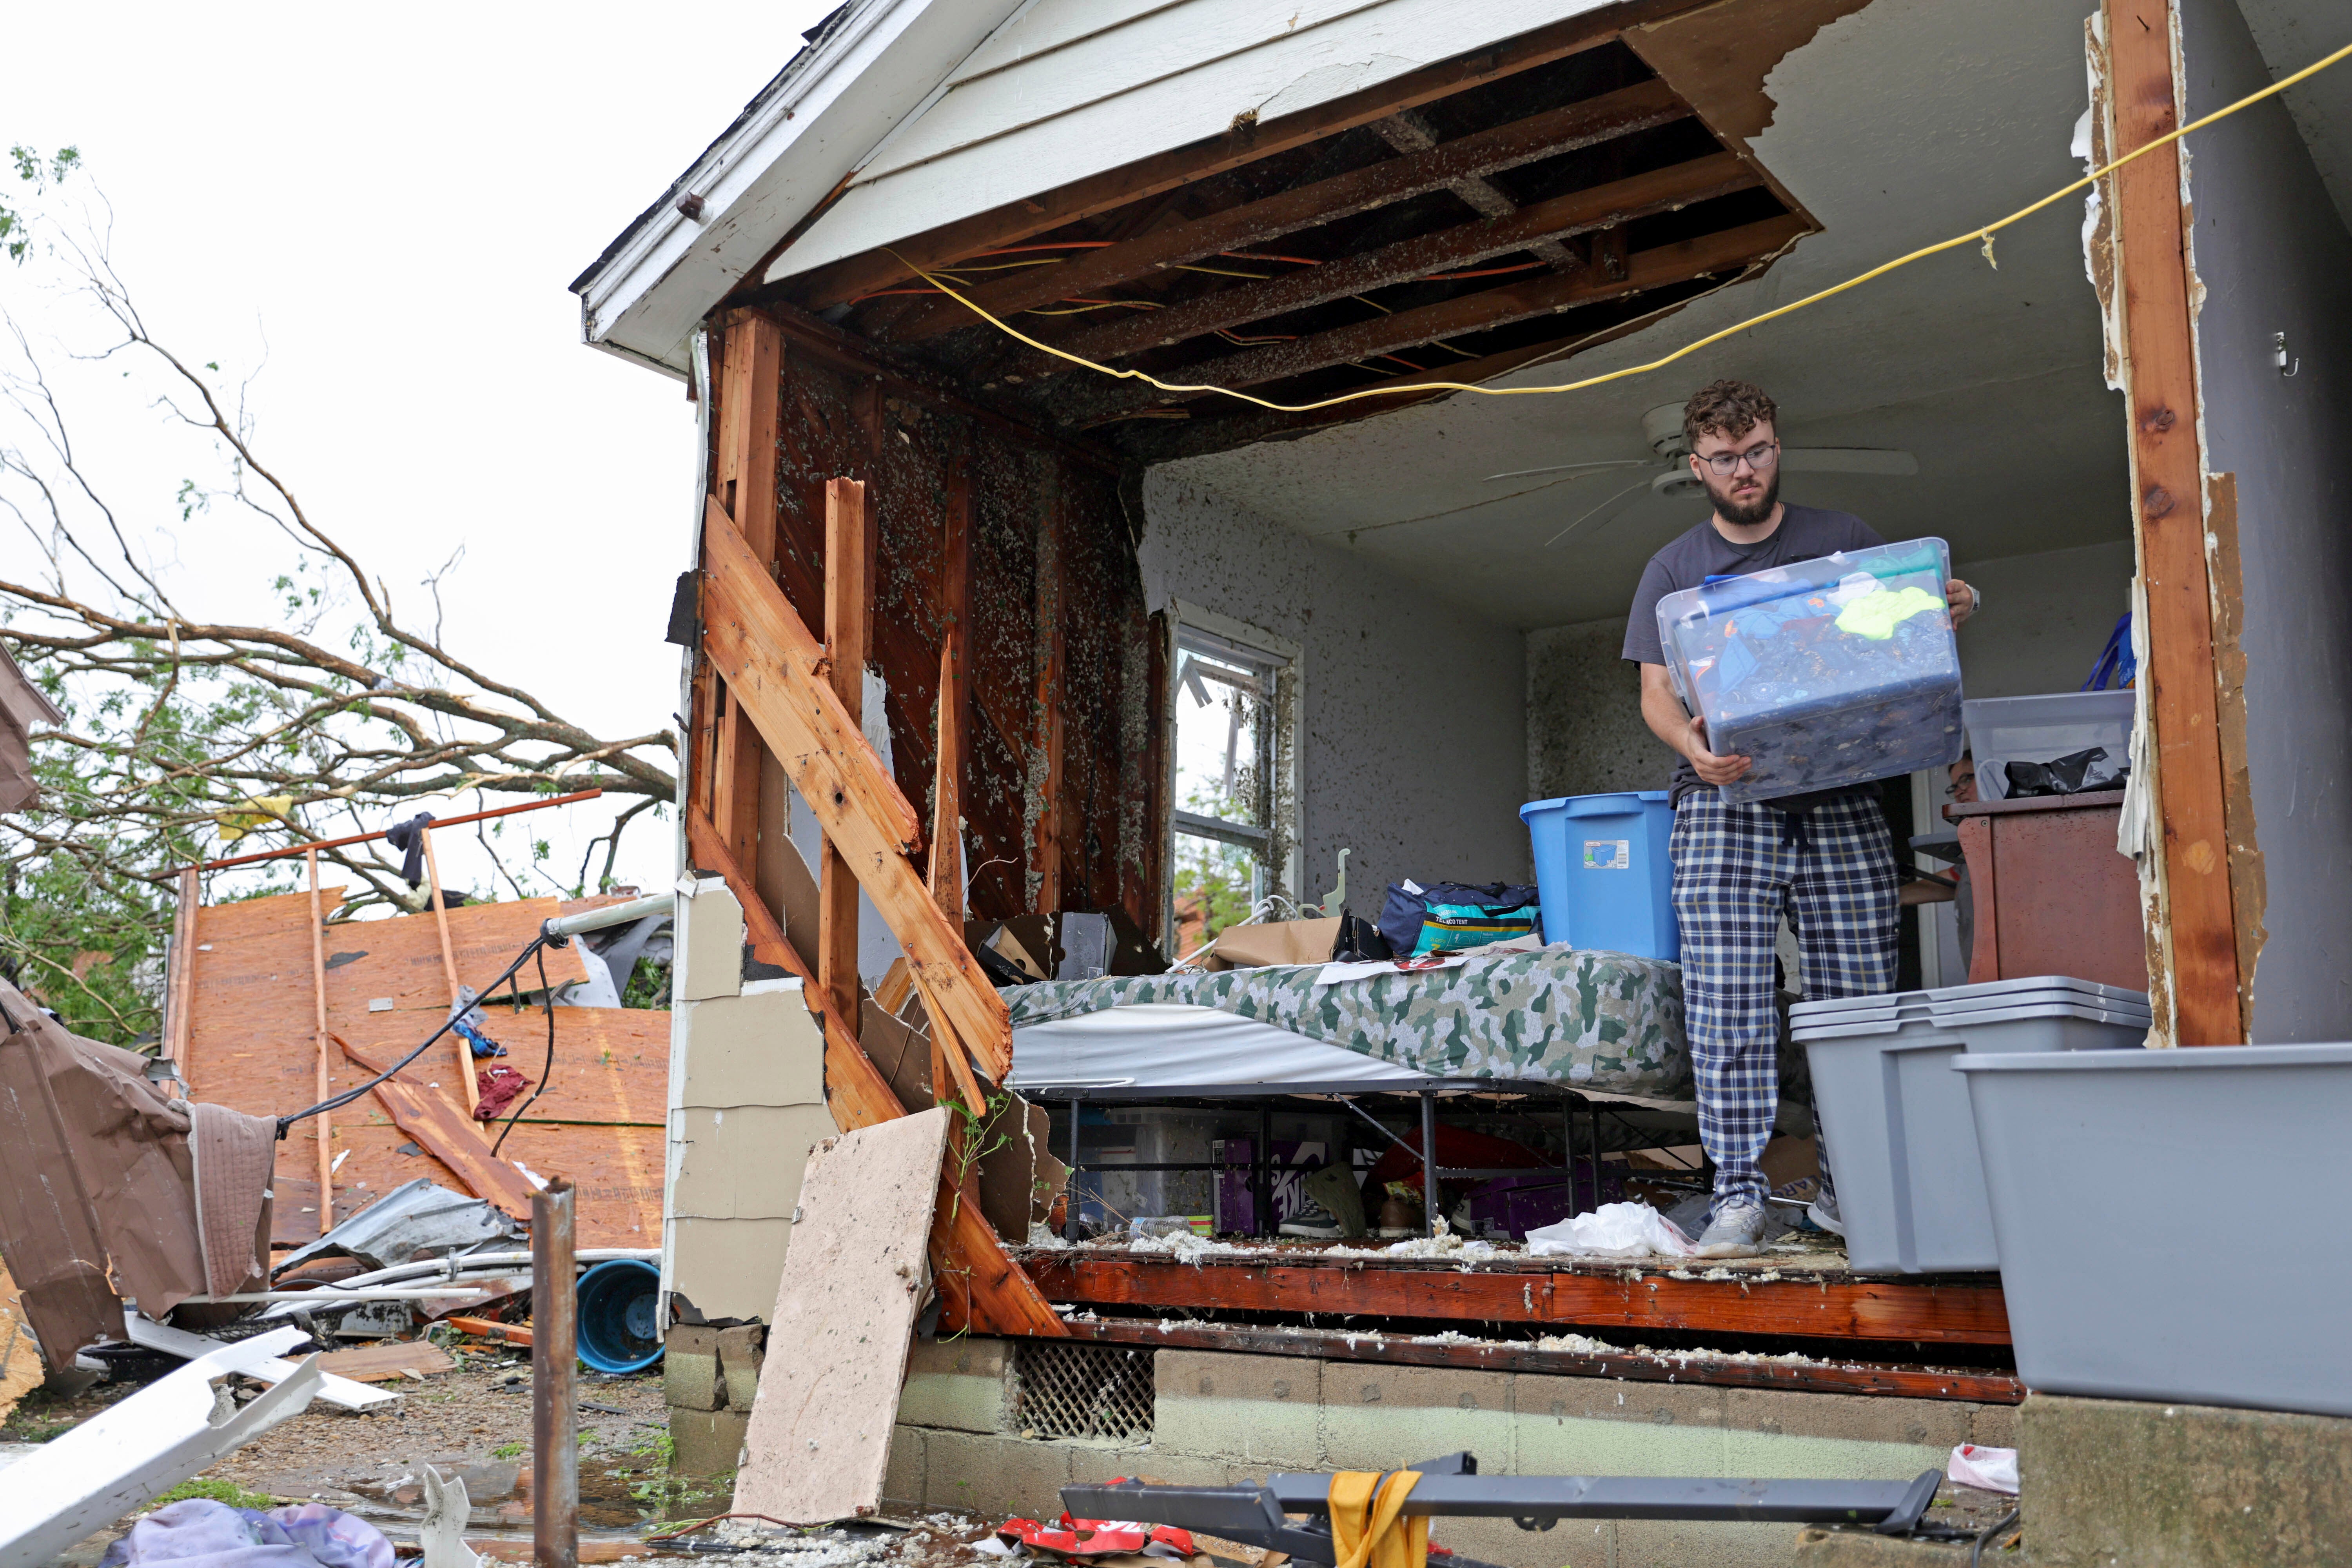 A man moves salvaged items from a destroyed home in Sulphur, Oklahoma on Sunday. At least 100 people statewide sustained injuries from the tornadoes